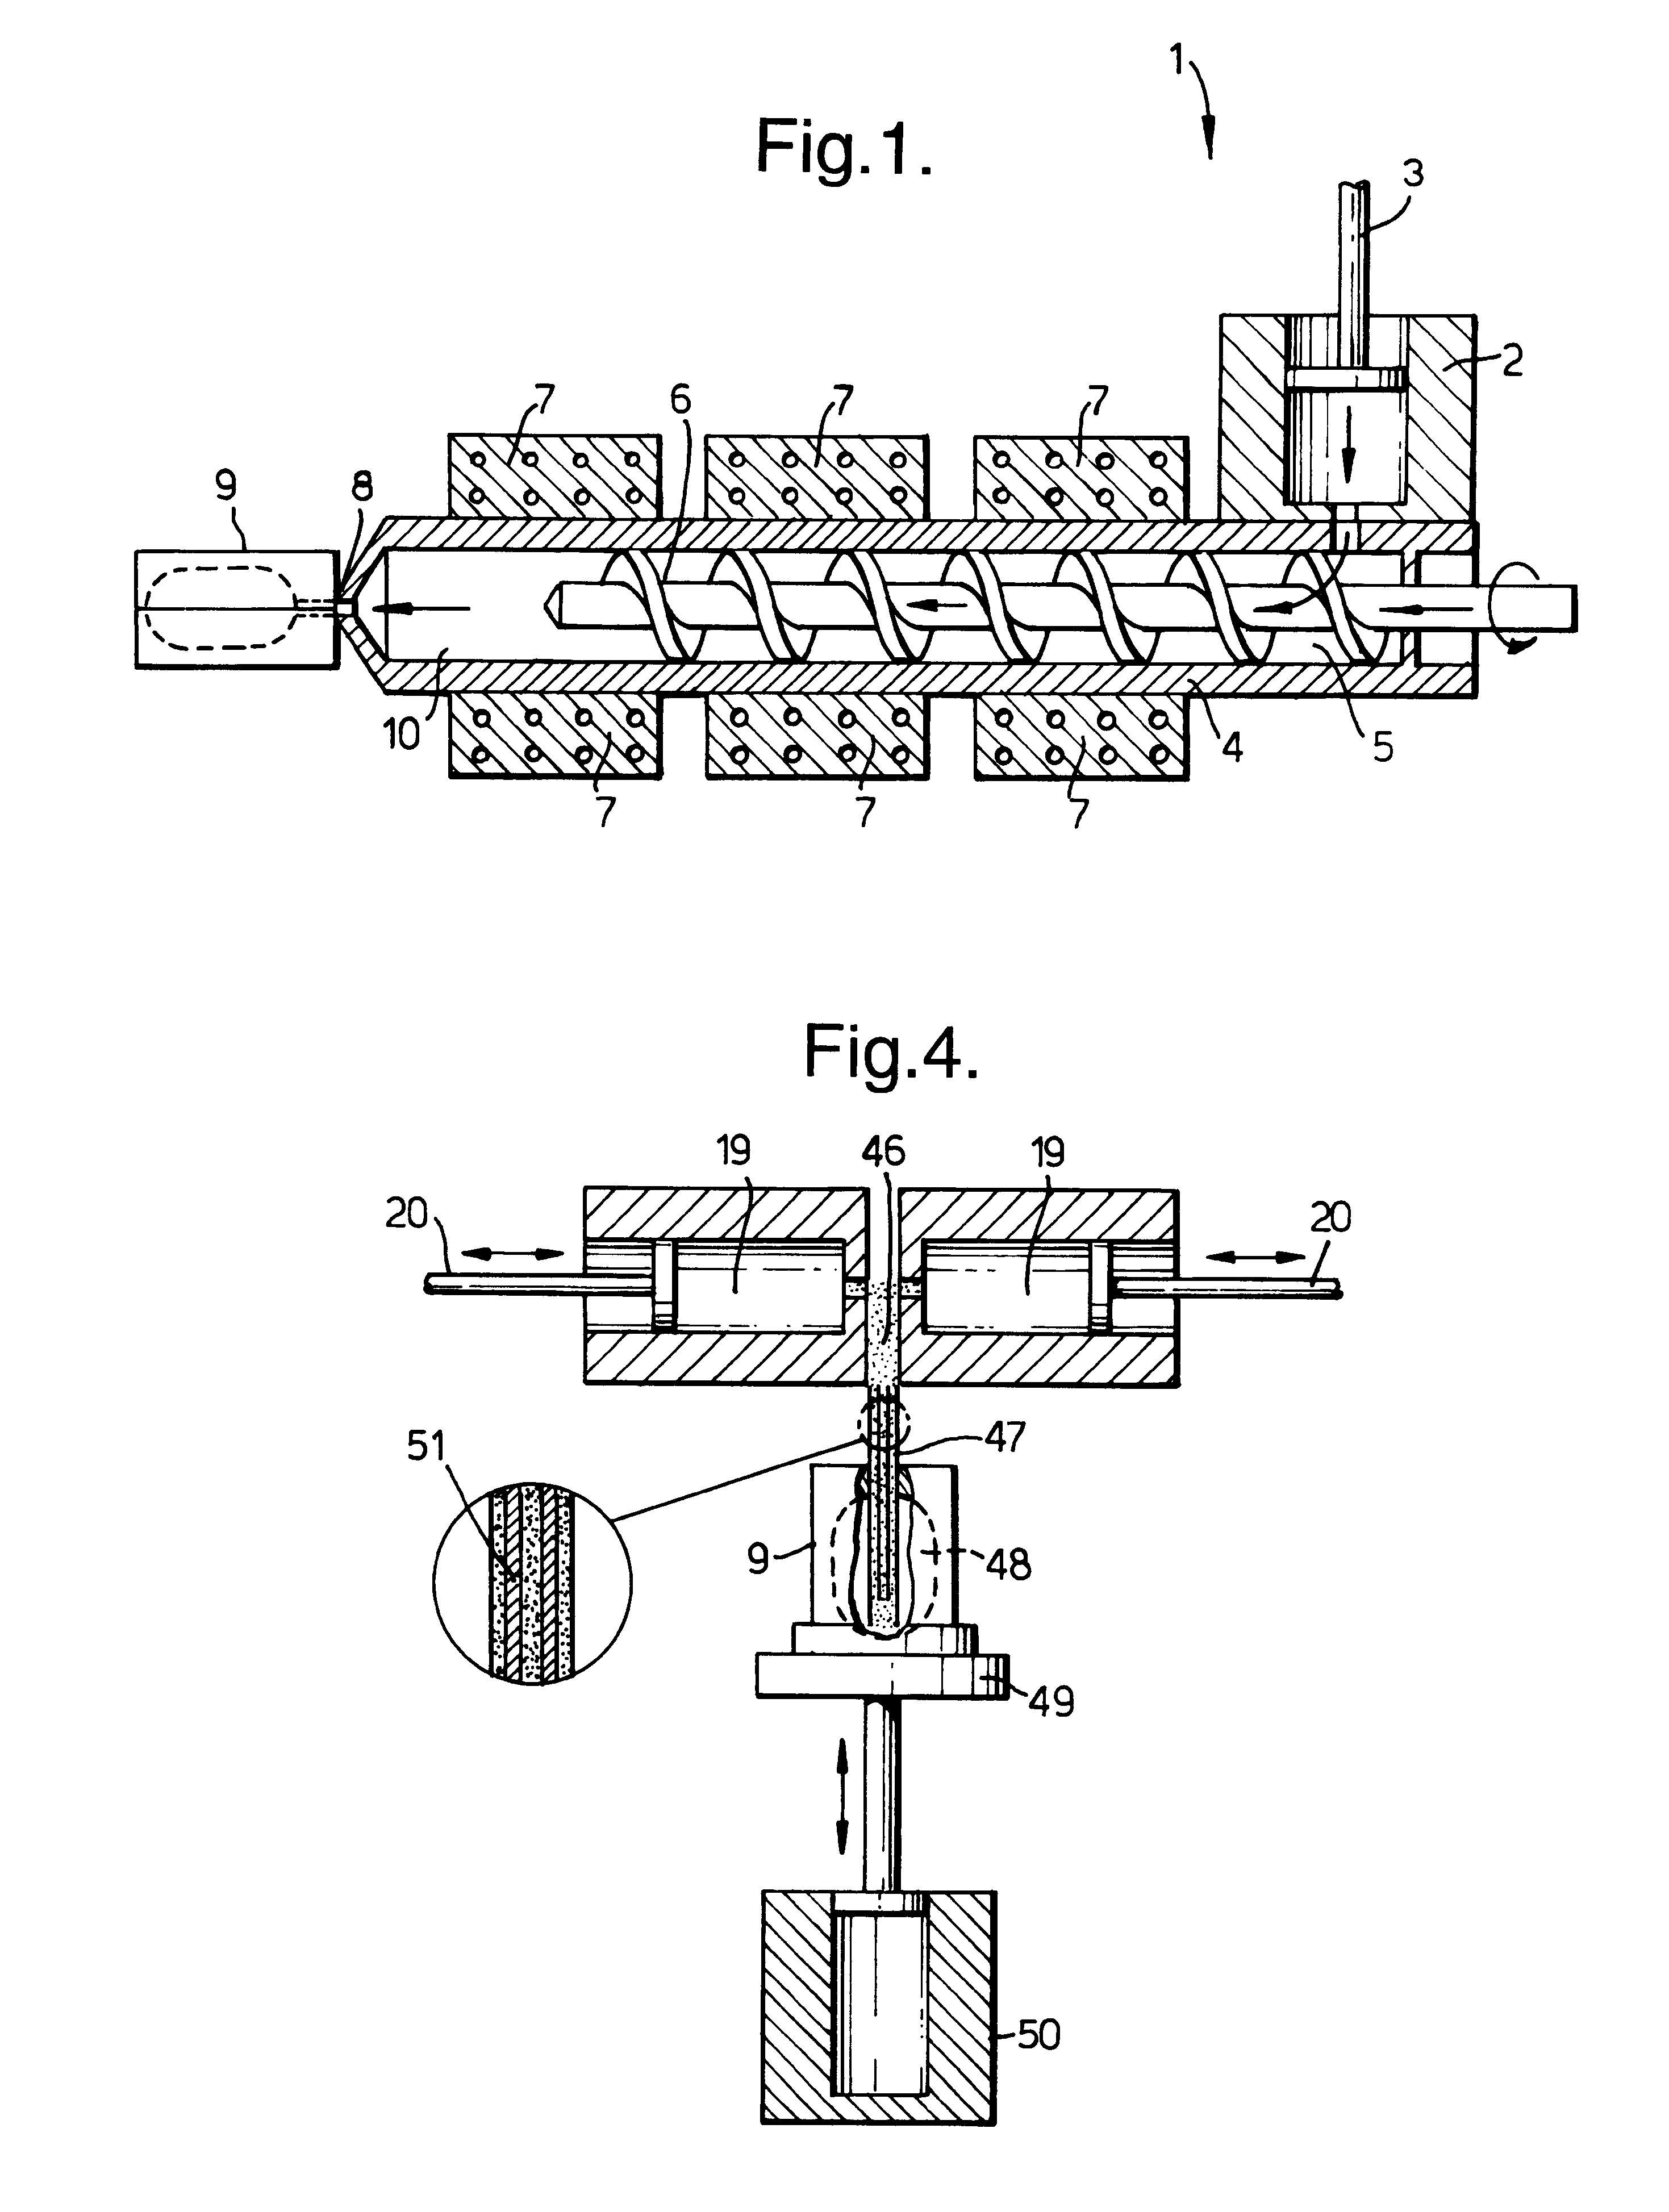 Process for molding of a detergent composition